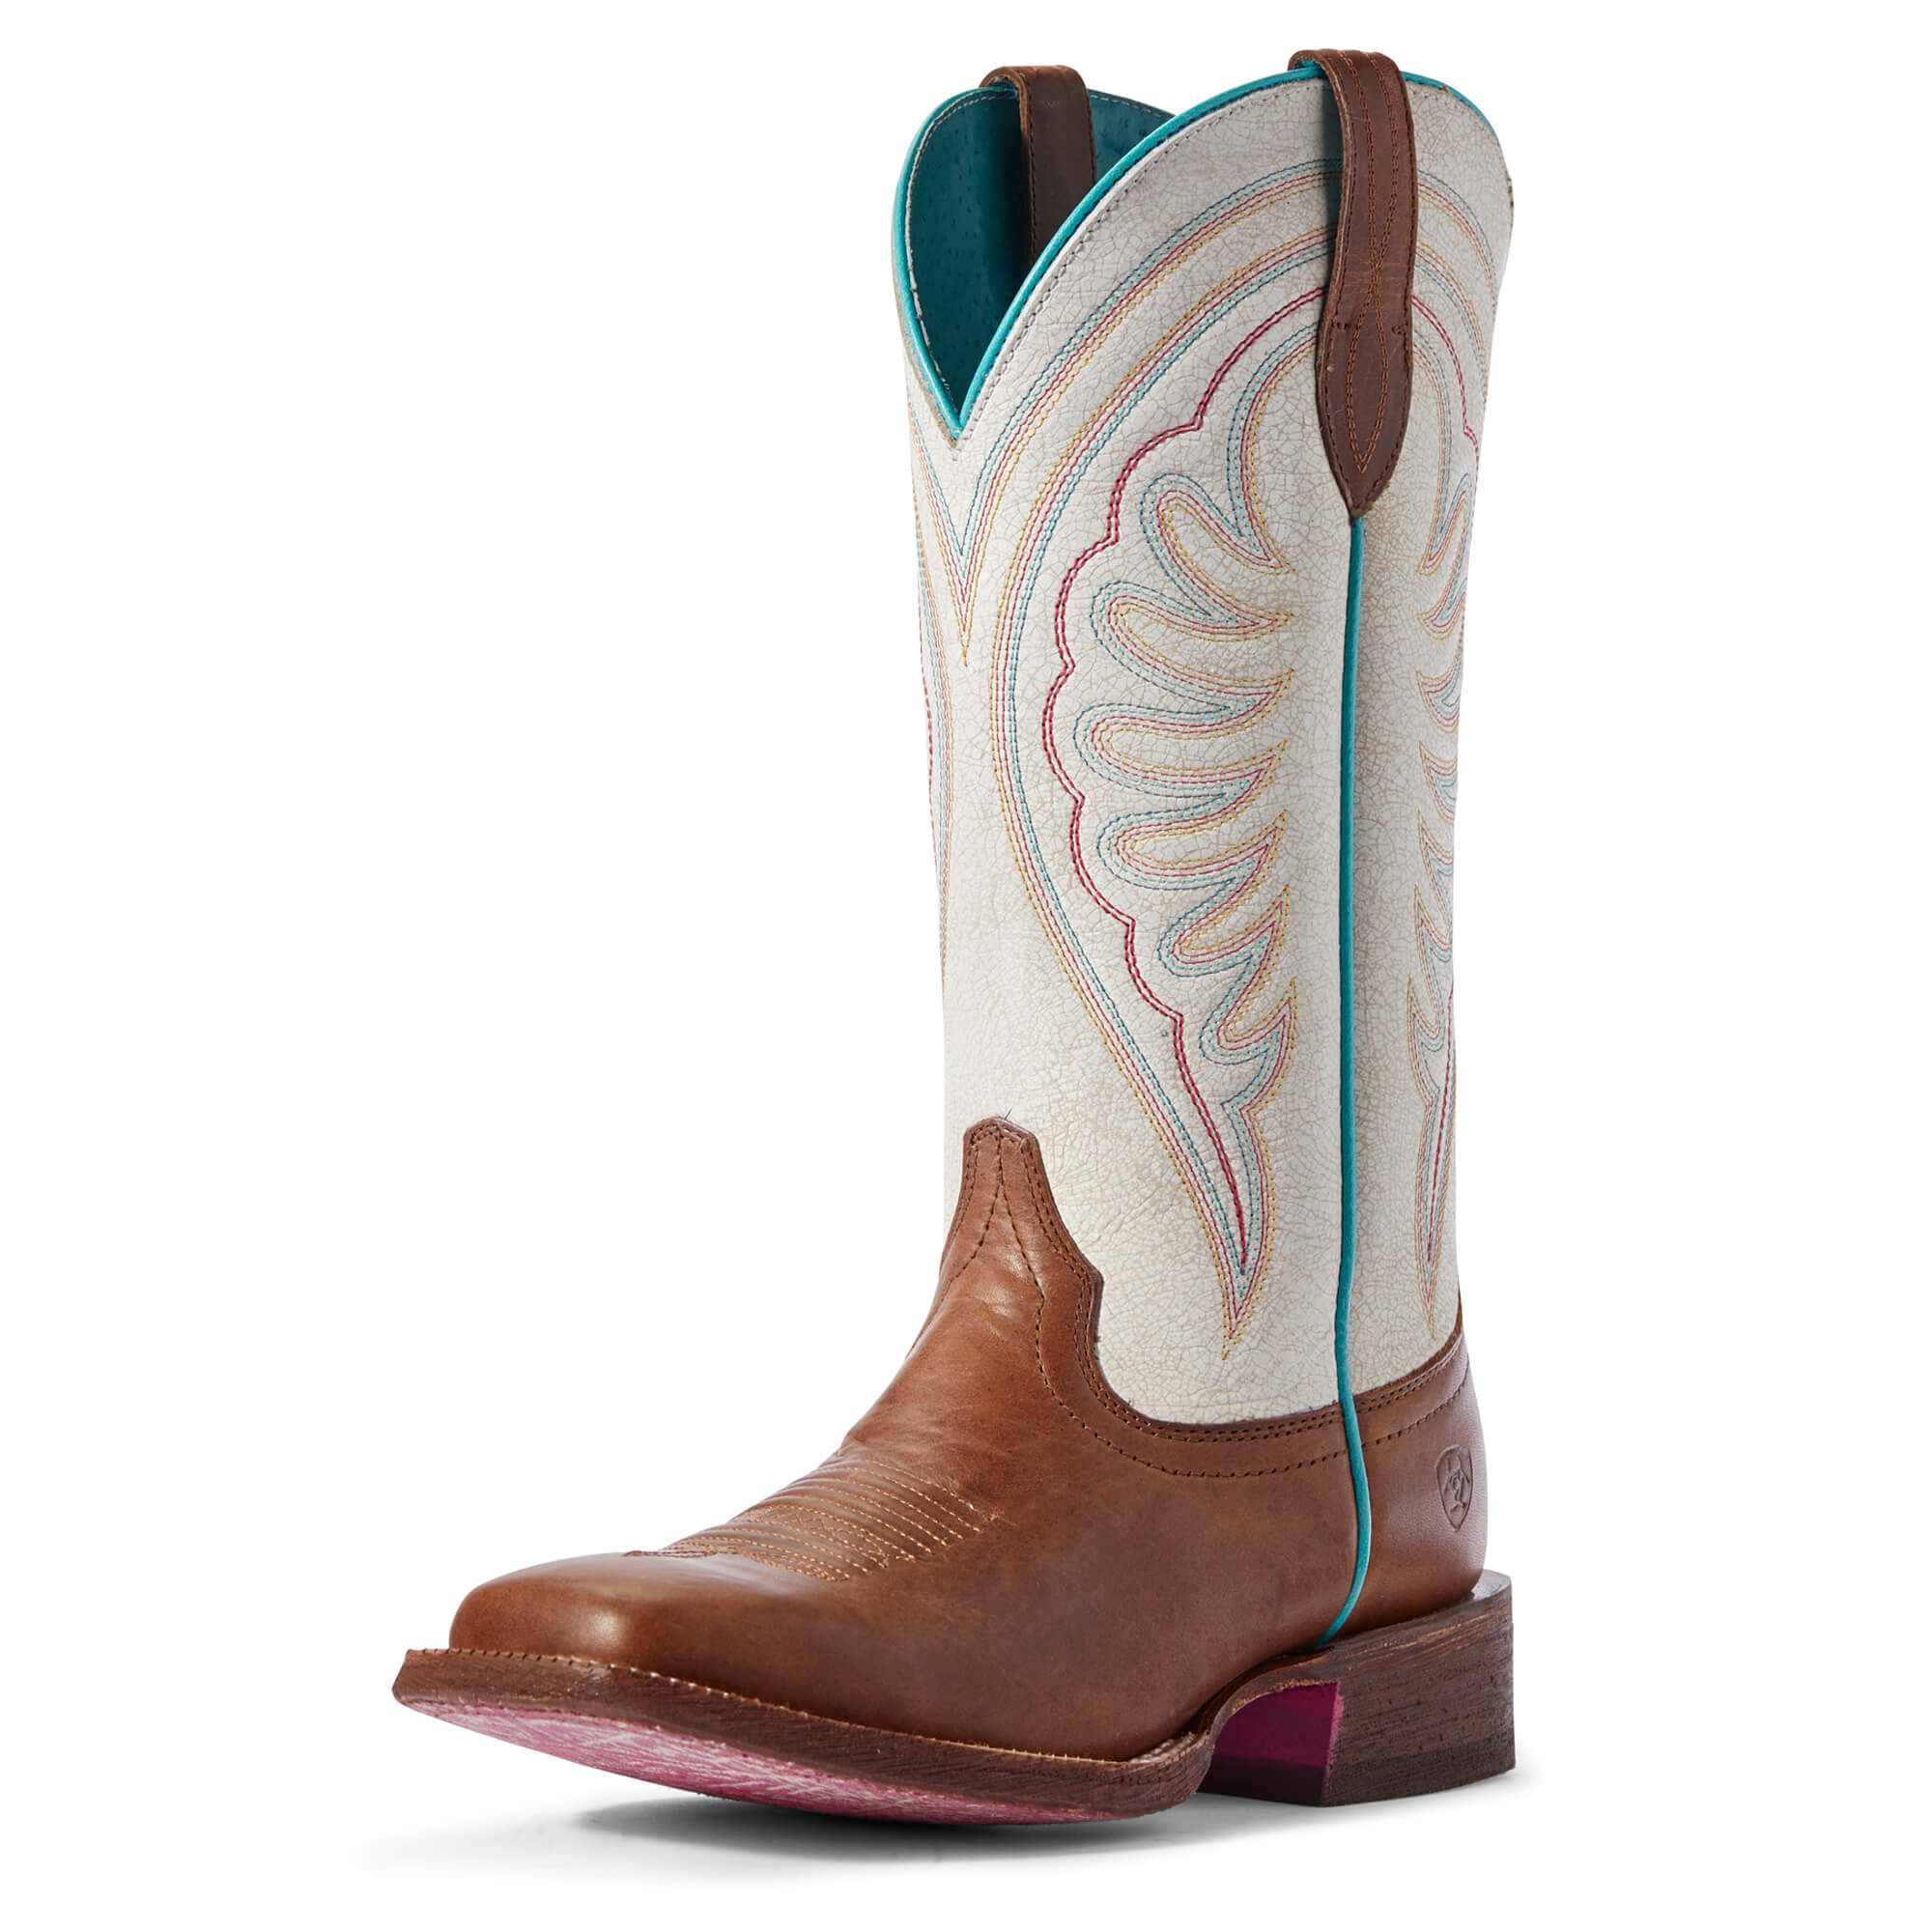 Women's Circuit Shiloh Western Boots in Red Brown Leather  by Ariat